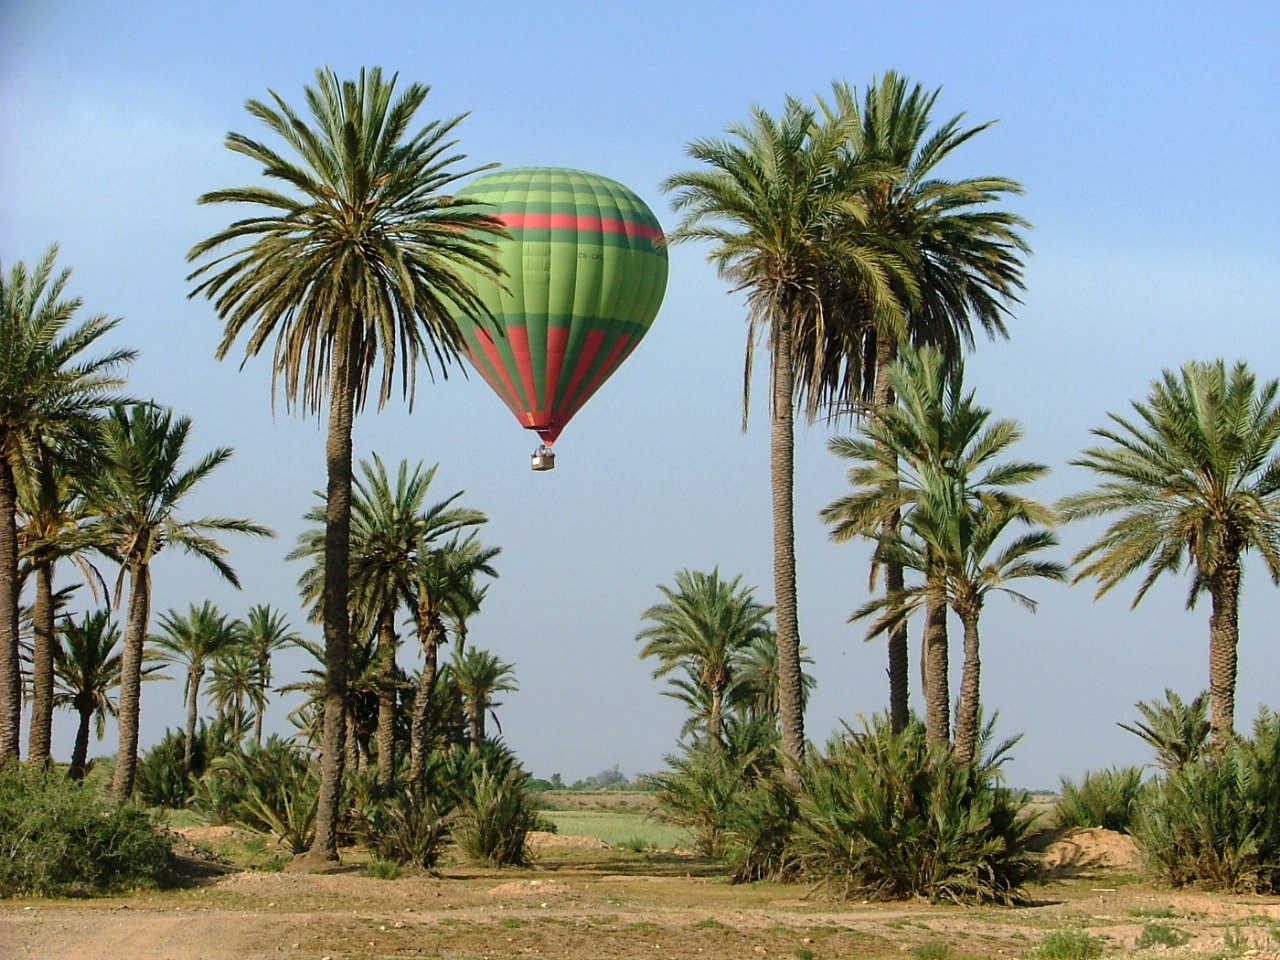 You are currently viewing Make your vacations more special with Hot Air Ballooning in Marrakech!